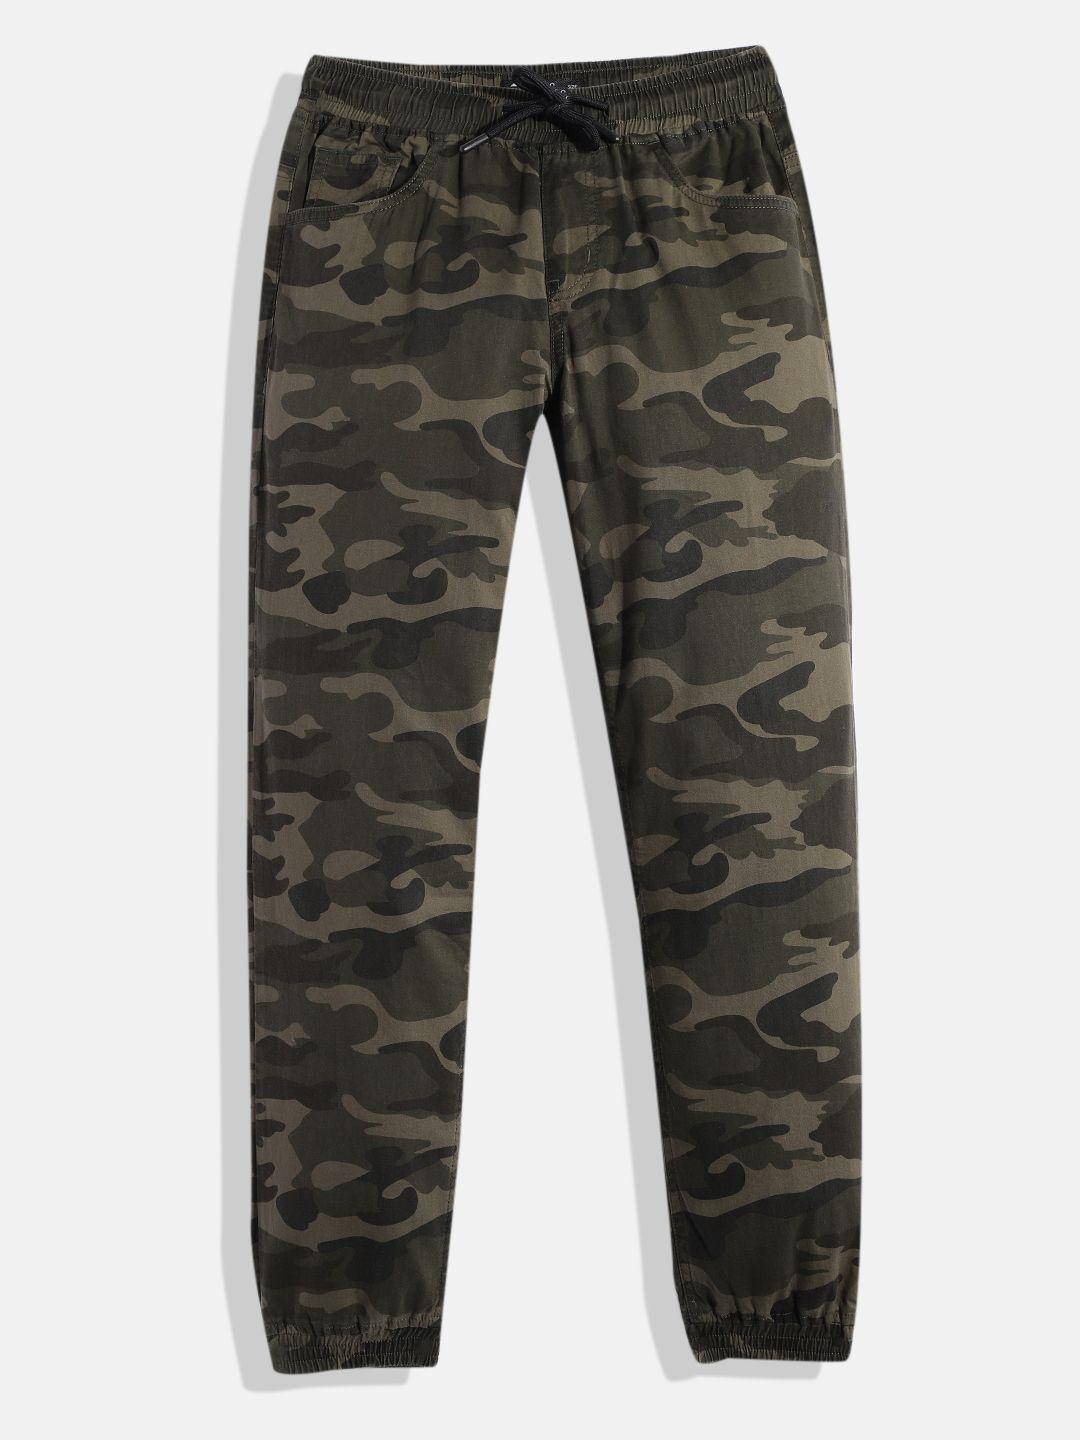 ivoc-boys-camouflage-printed-slim-fit-joggers